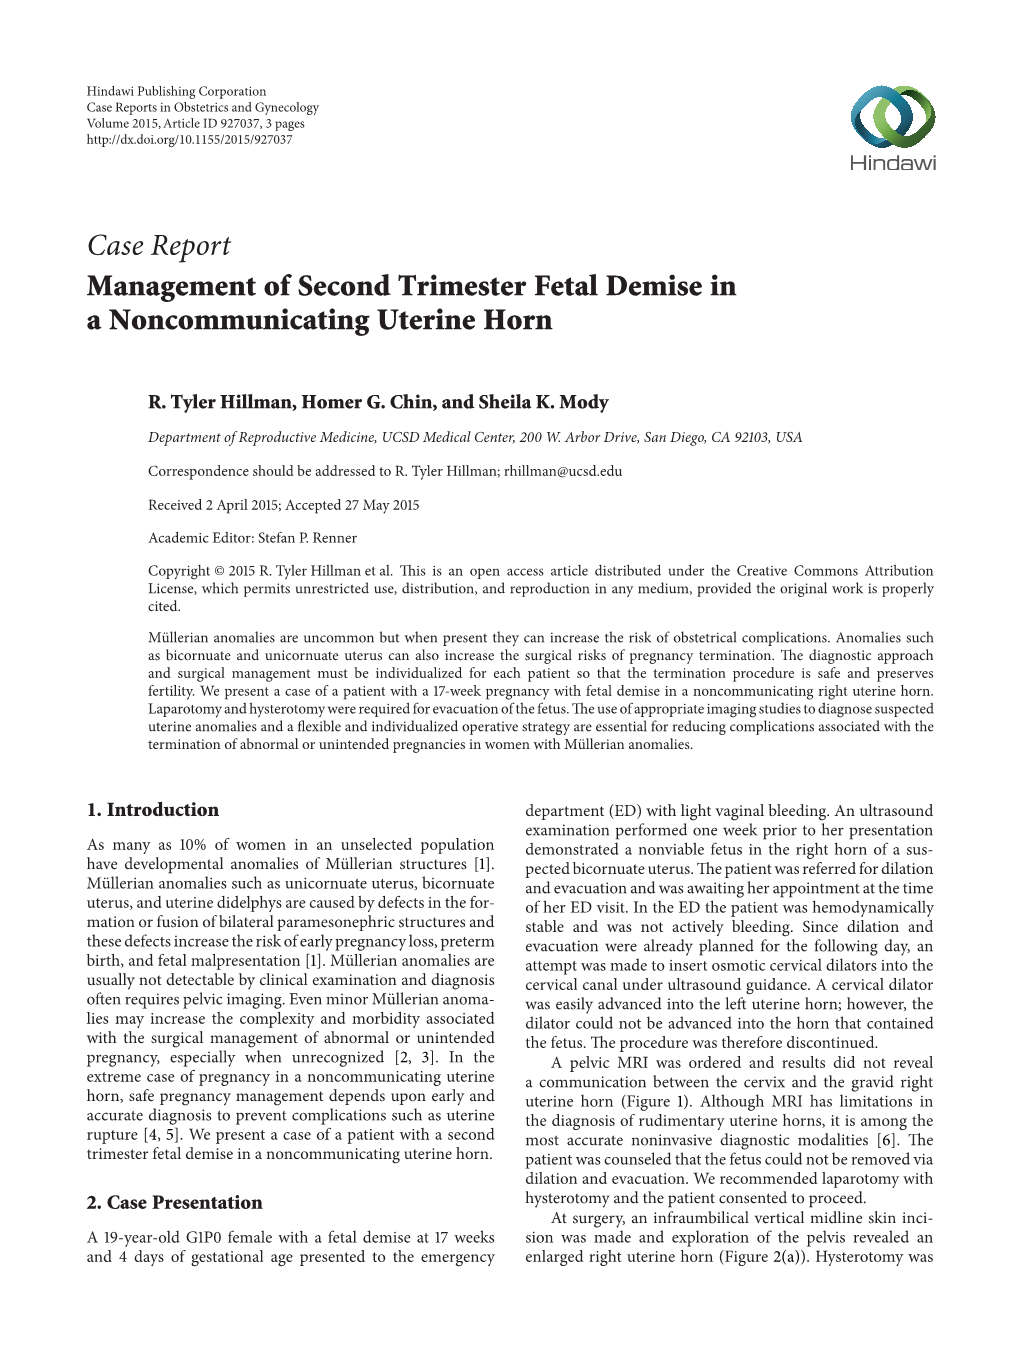 Management of Second Trimester Fetal Demise in a Noncommunicating Uterine Horn